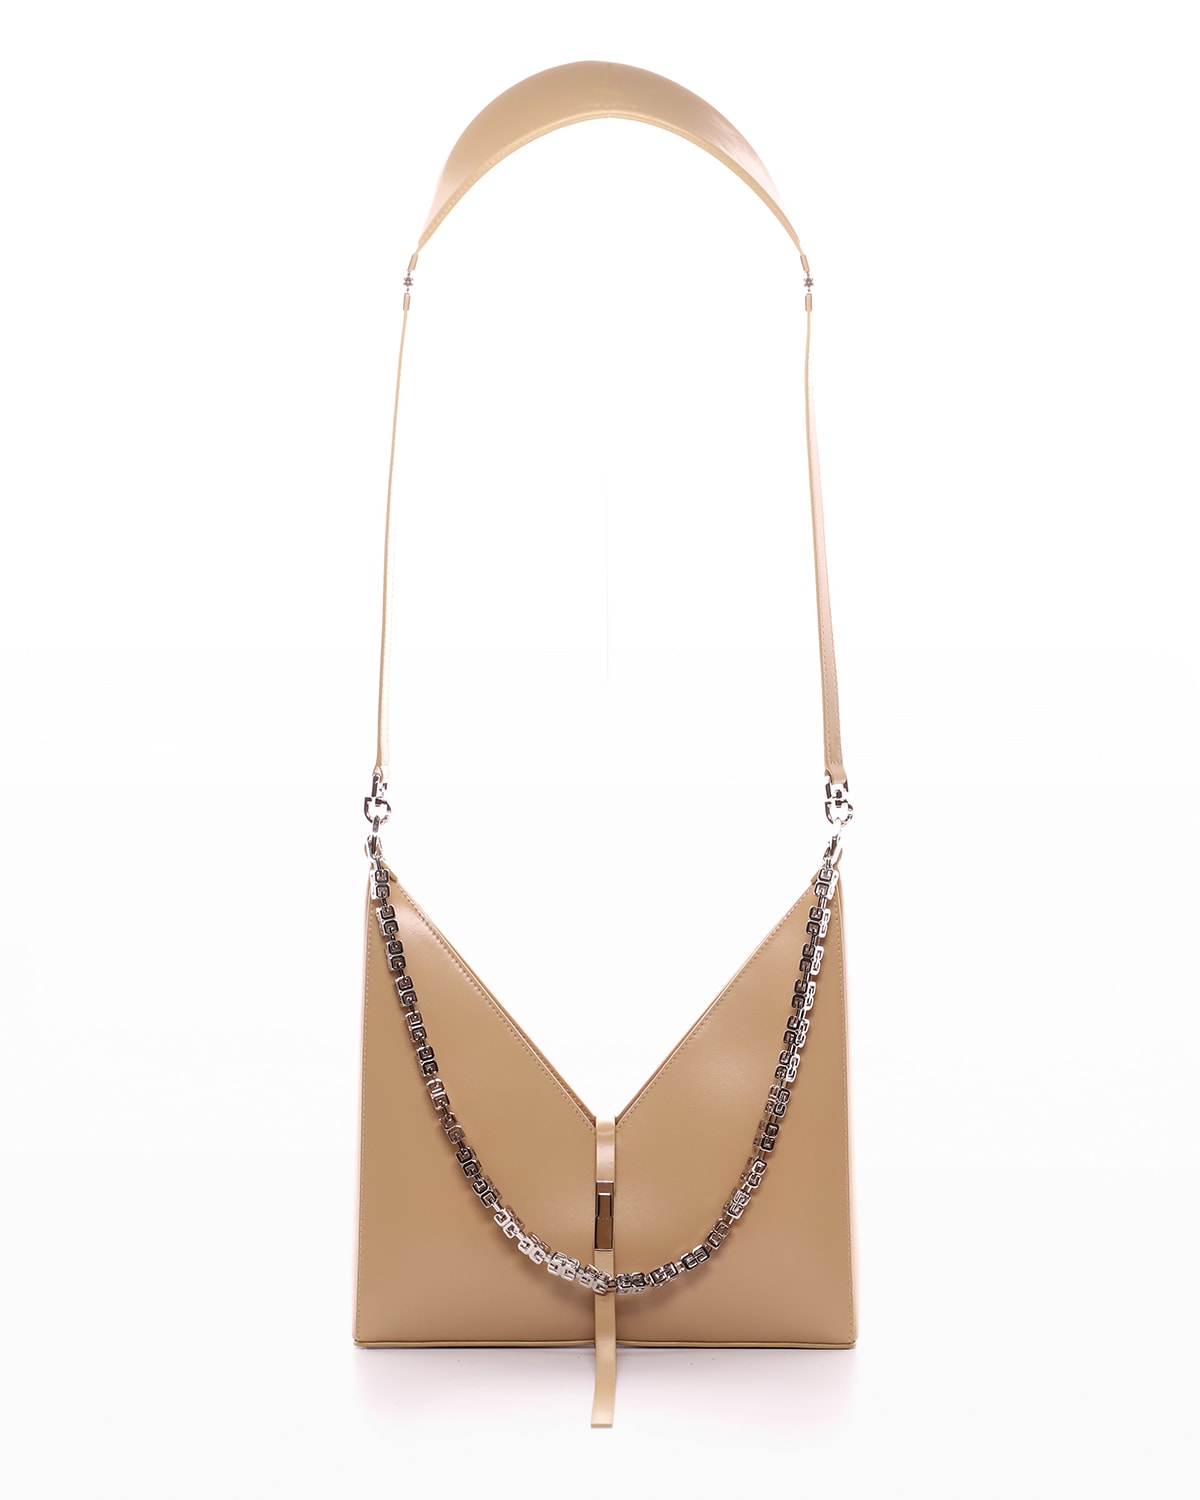 Givenchy Cutout Small Leather Shoulder Bag w/ Chain